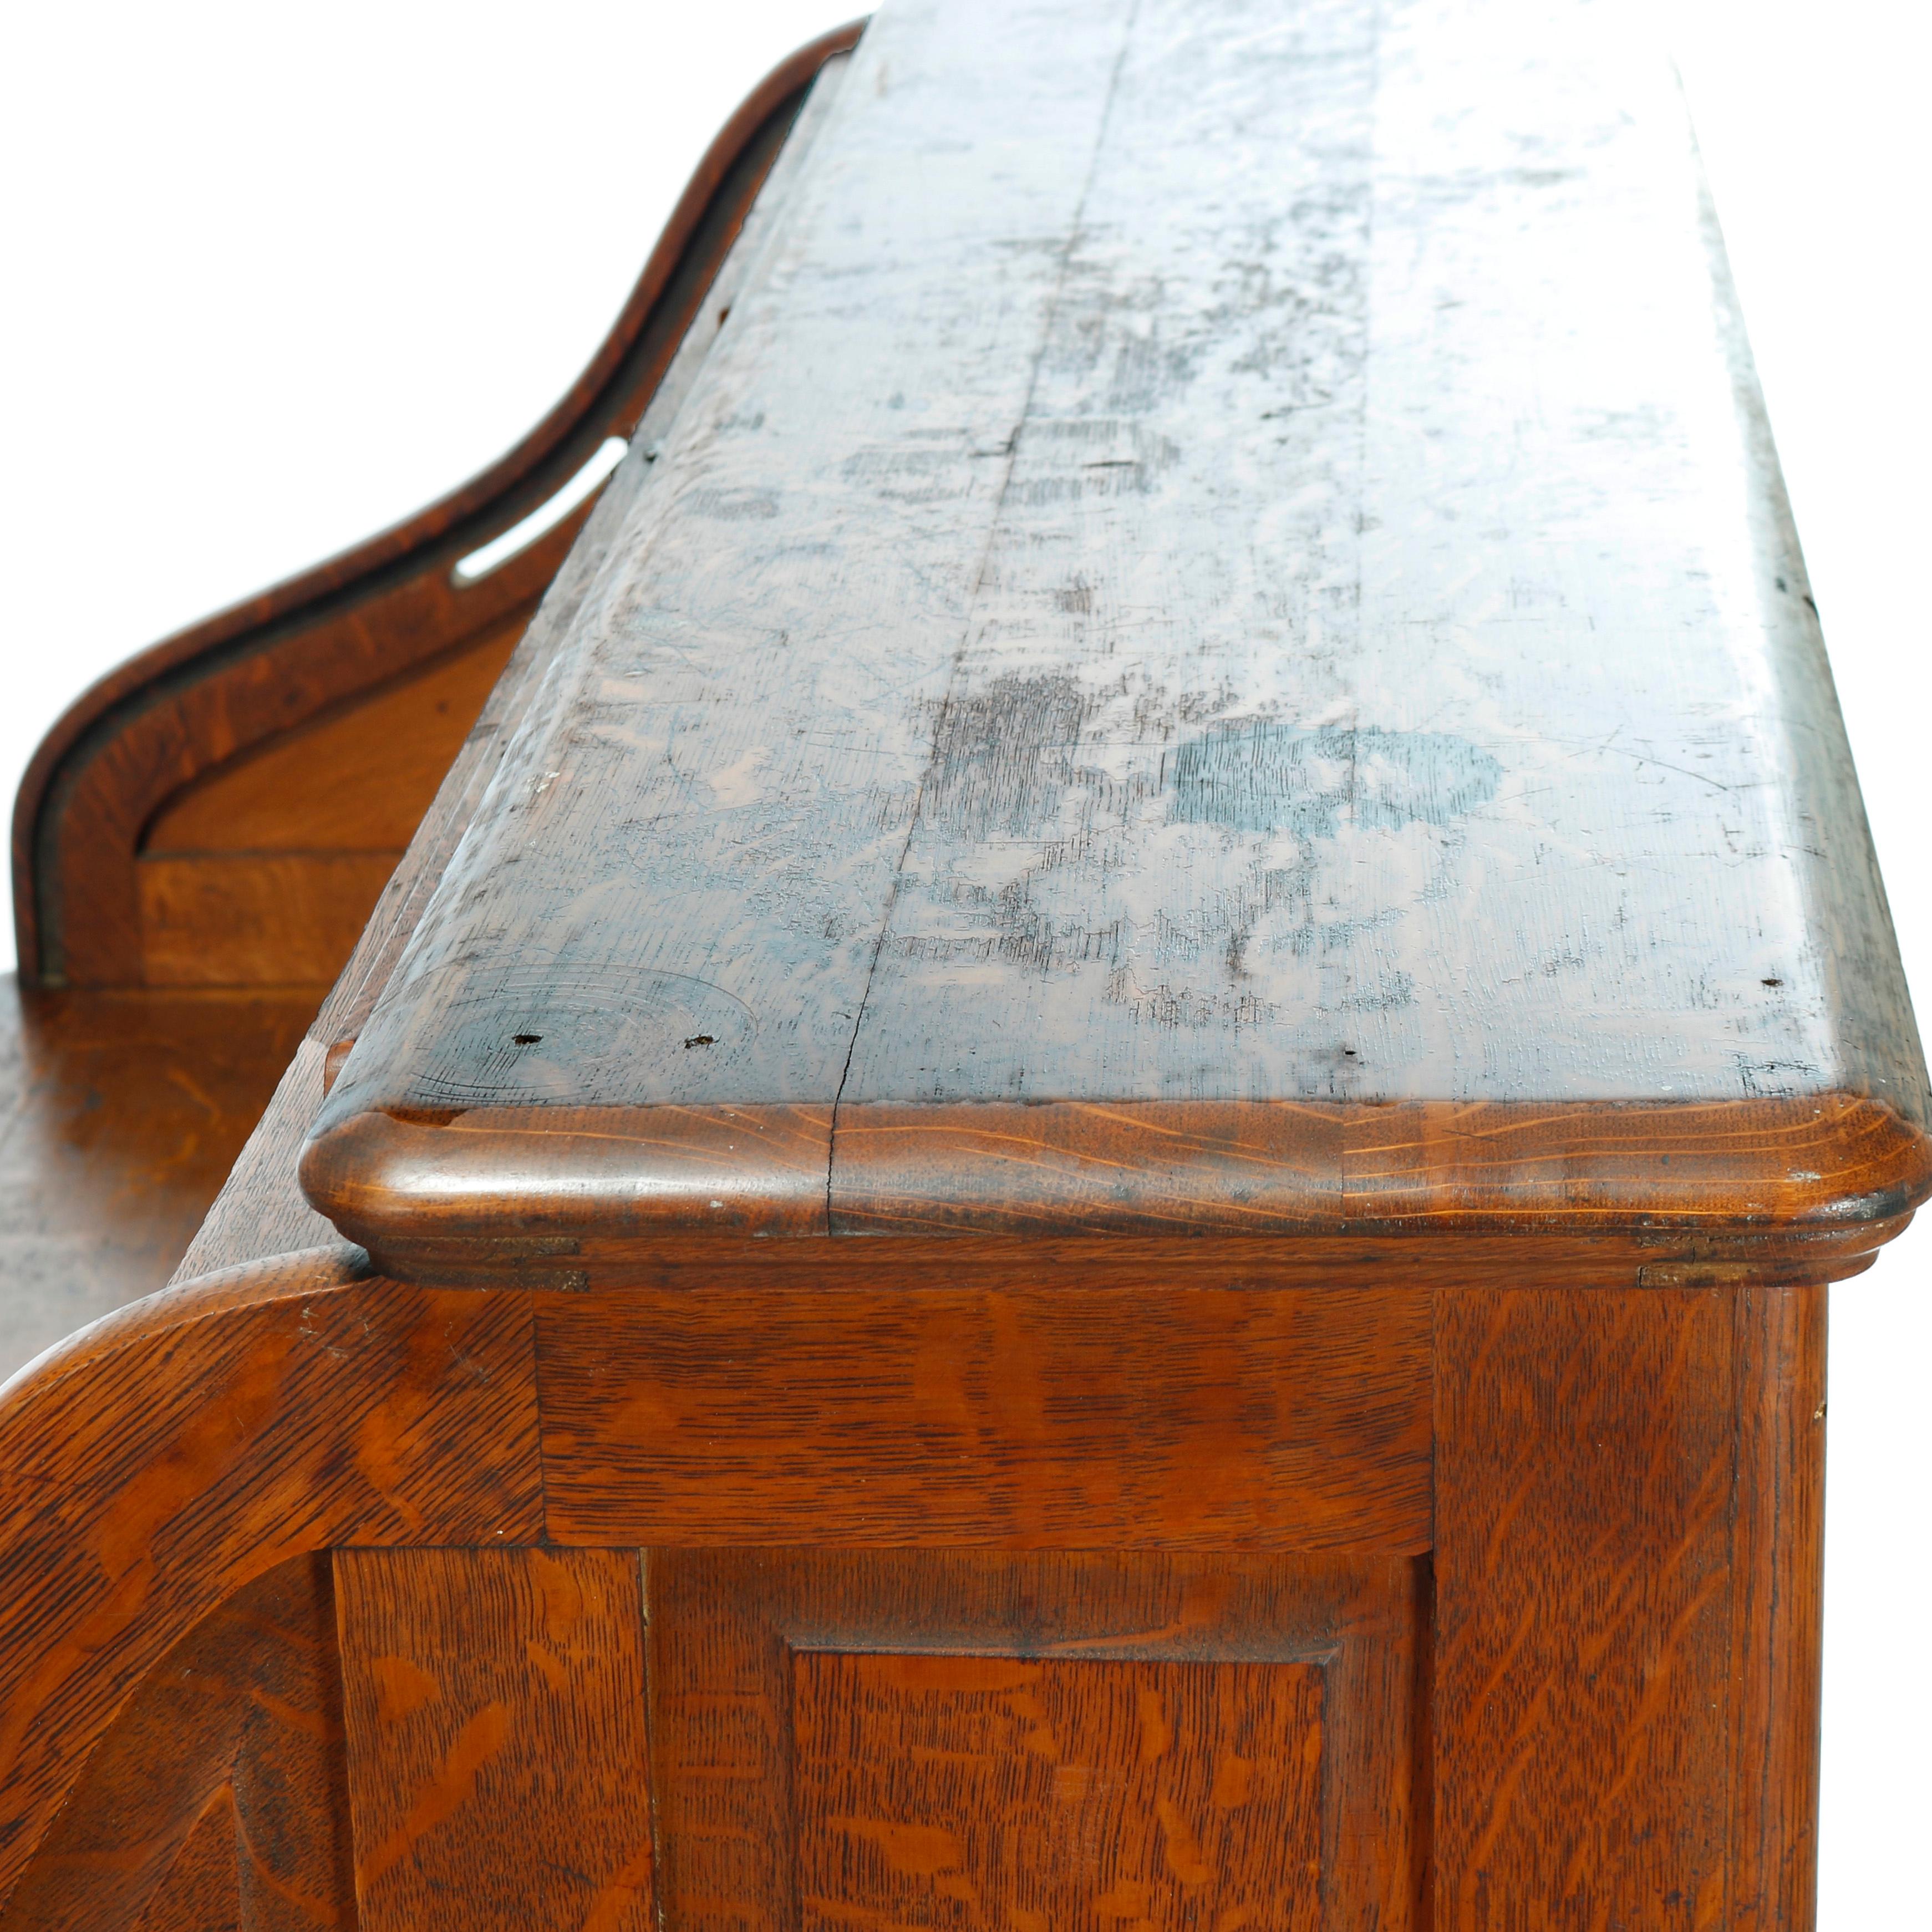 20th Century Antique Derby School Paneled Oak Roll Top Desk with Full Interior, C1900 For Sale